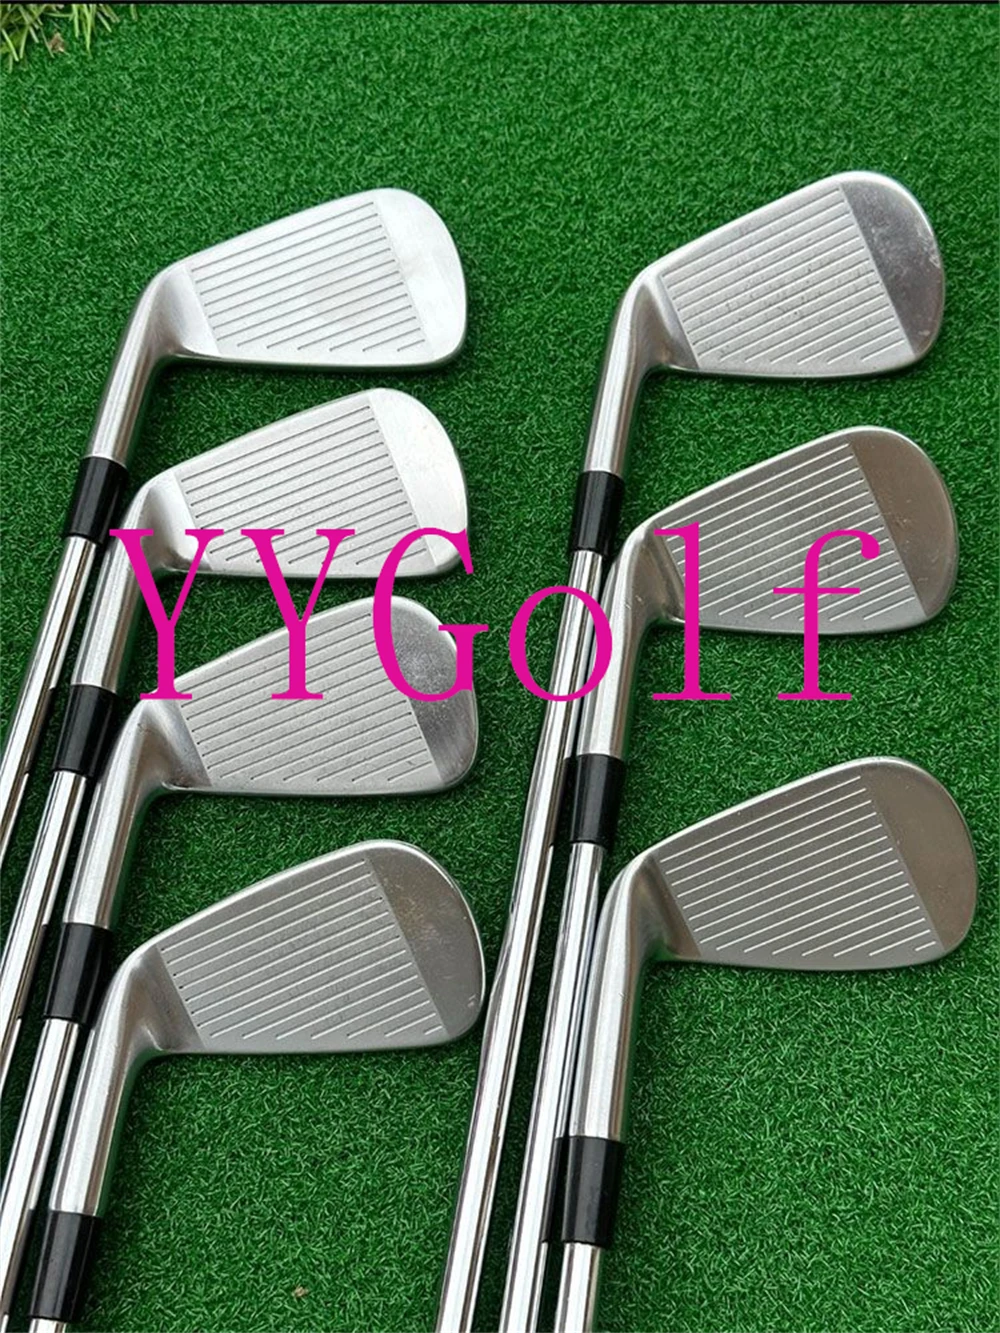 

2022 7PCS 770 Model Forged Golf Clubs Irons Set 4-9P Regular/Stiff Steel/Graphite Shafts Including Headcovers Fast Shipping